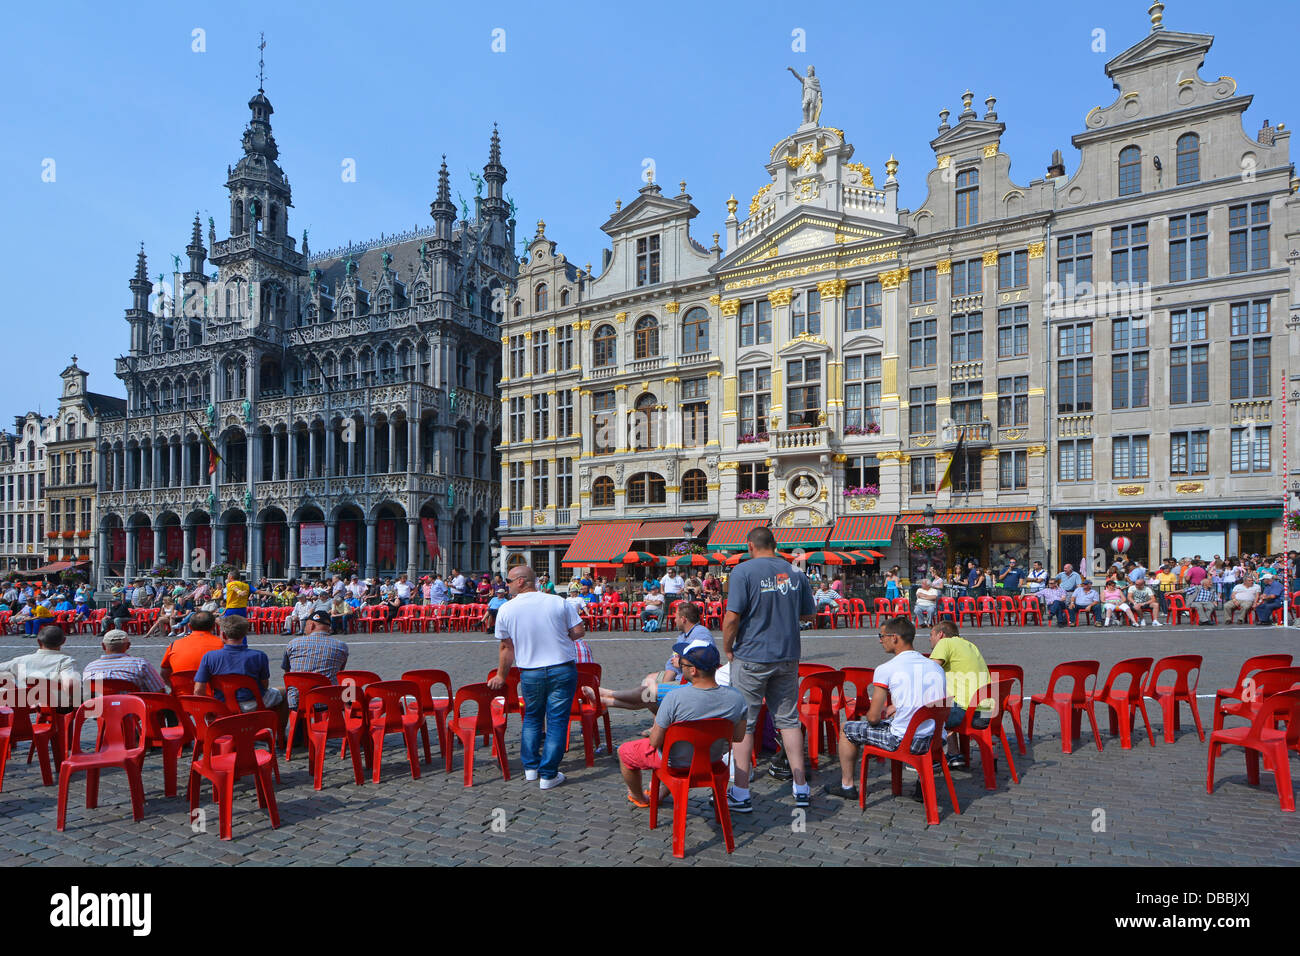 Spectators about to view Frisian handball gam in Grand Place, Museum of the City of Brussels (left) and Guildhalls (right) Stock Photo